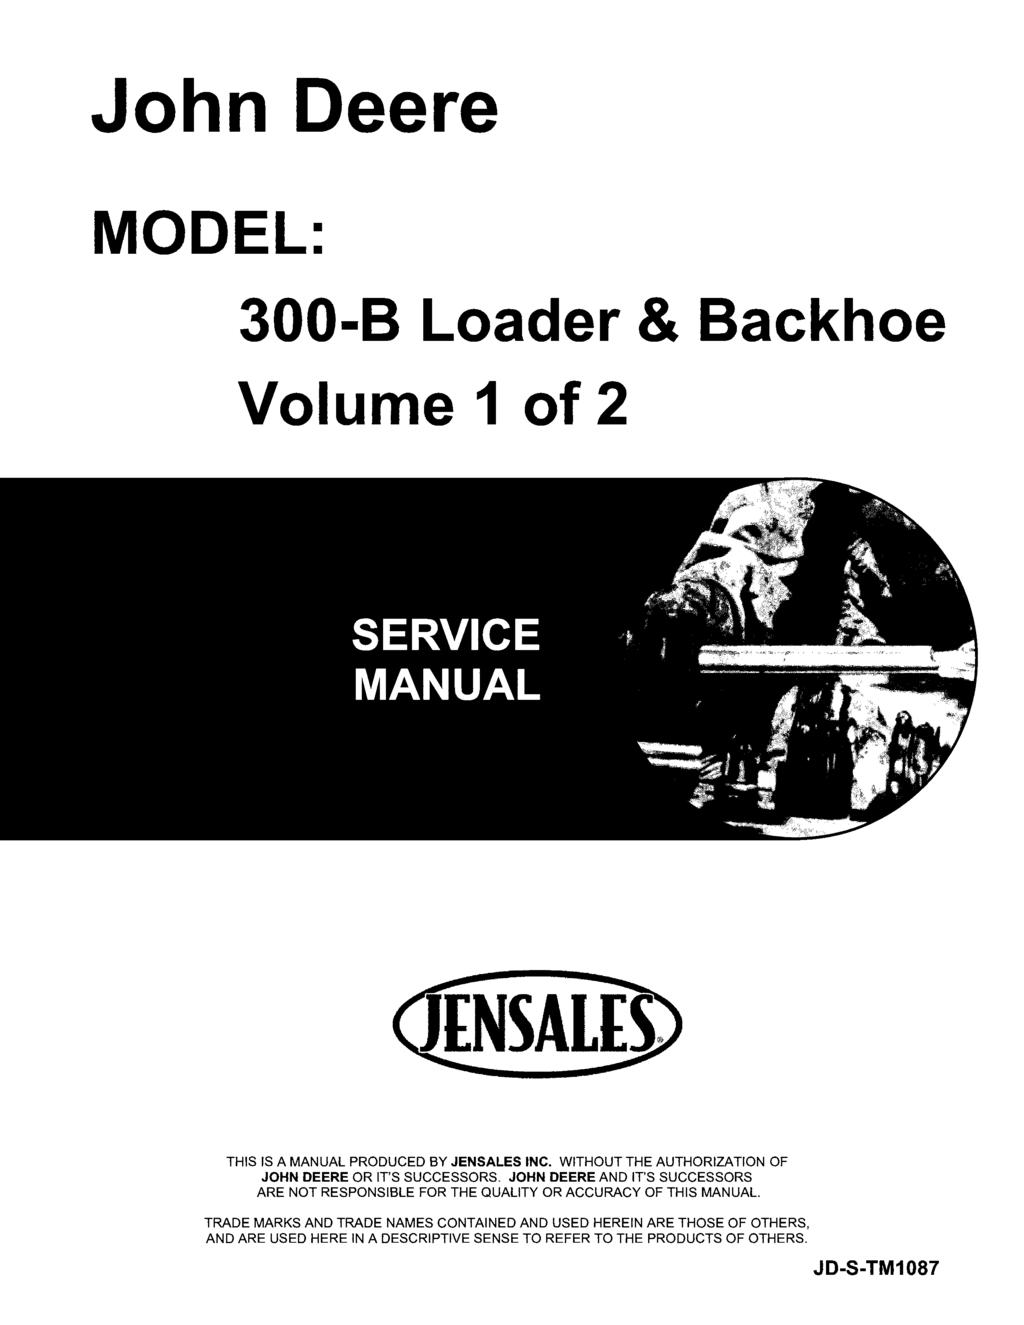 John Deere MODEL: 300-B Loader & Backhoe Volume 1 of 2 THIS IS A MANUAL PRODUCED BY JENSALES INC. WITHOUT THE AUTHORIZATION OF JOHN DEERE OR IT'S SUCCESSORS.